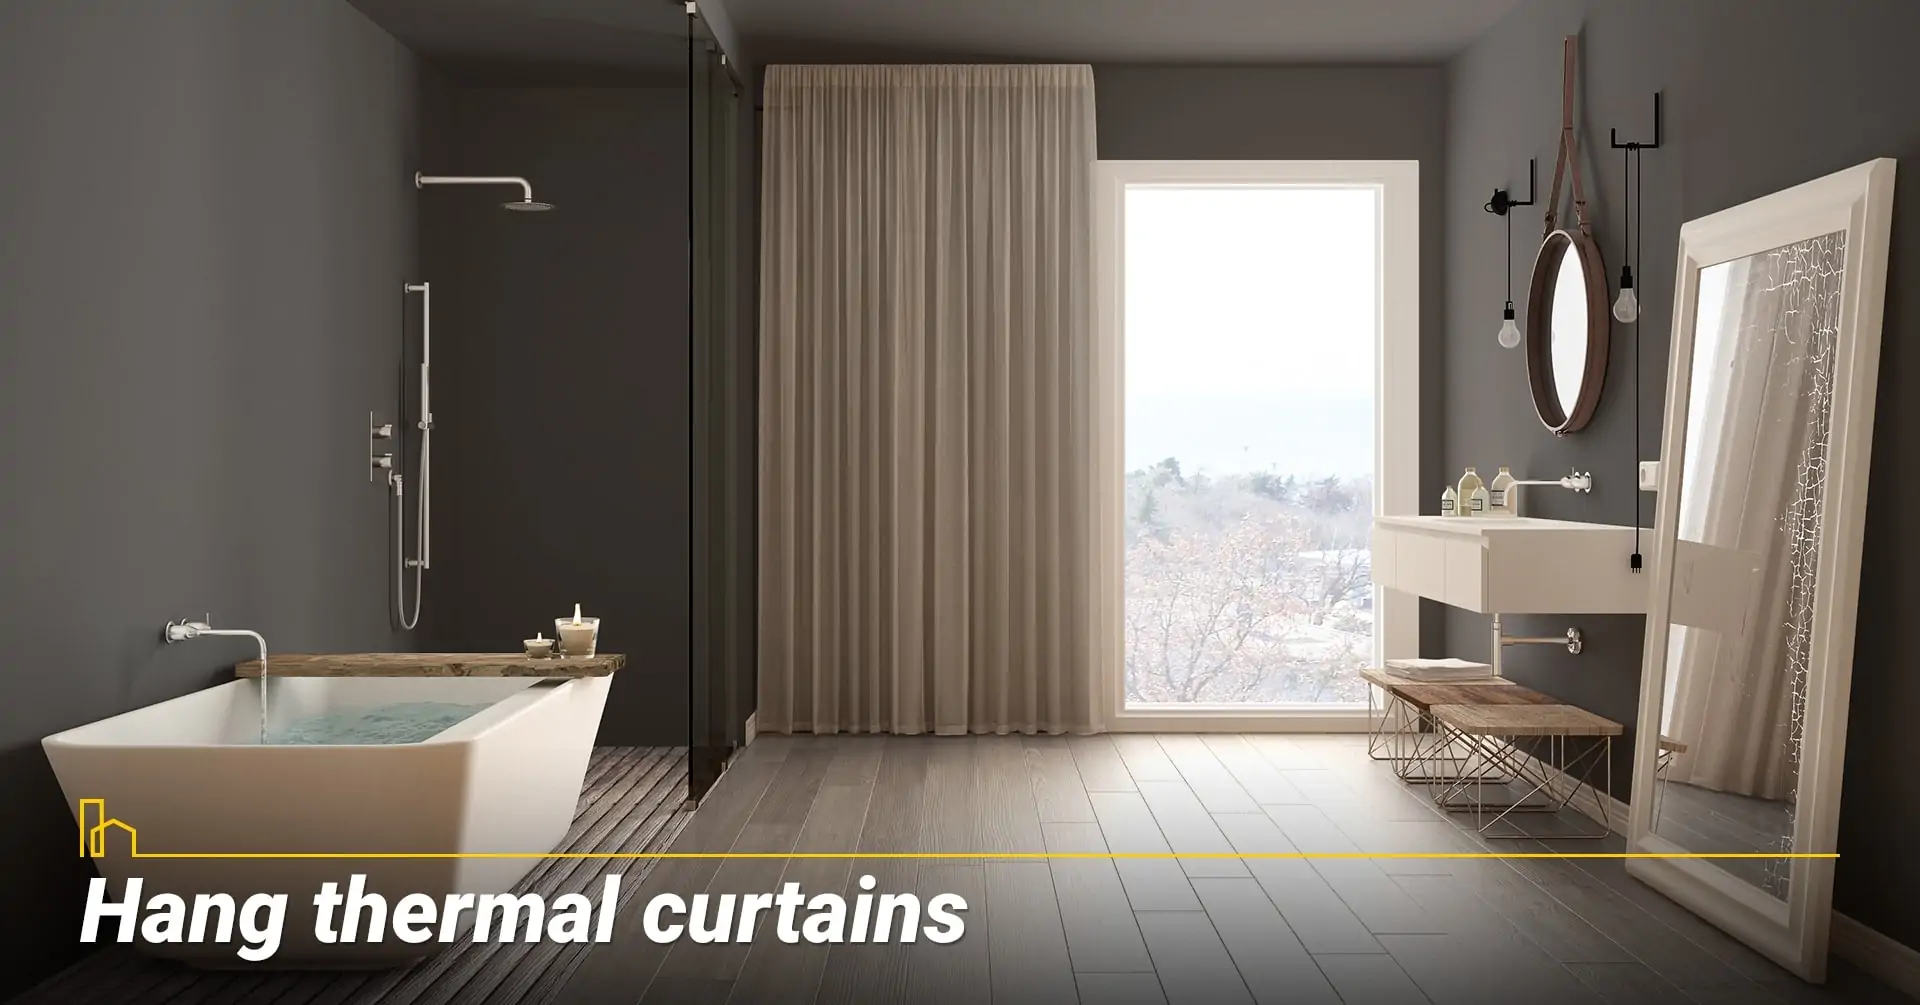 Hang thermal curtains, use thermal curtains to block cold weather